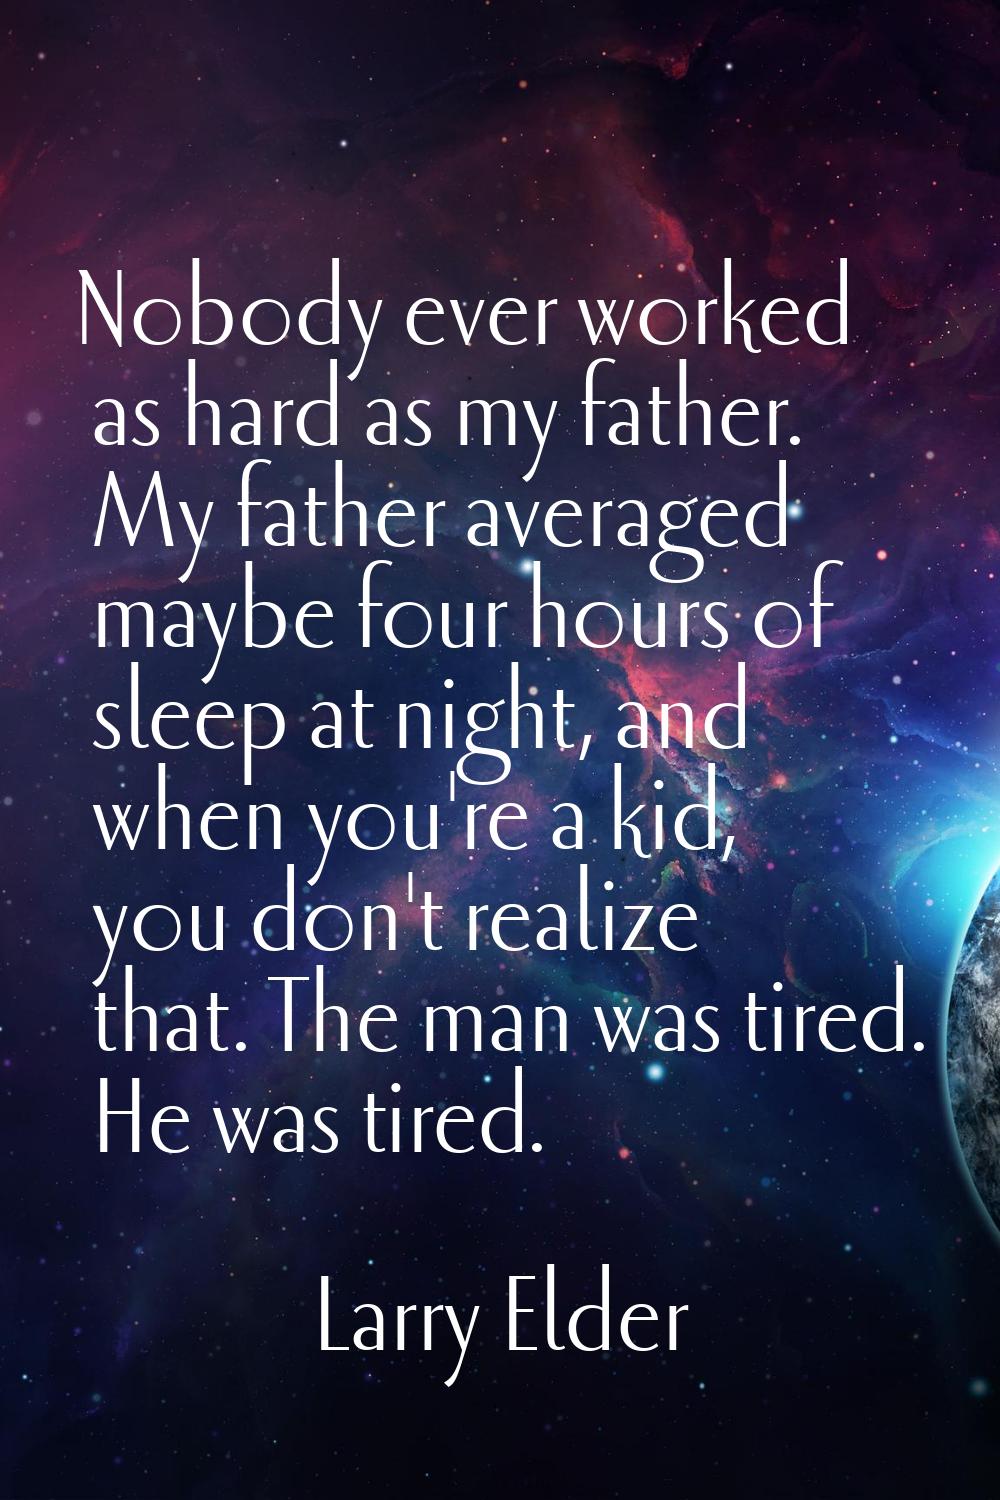 Nobody ever worked as hard as my father. My father averaged maybe four hours of sleep at night, and